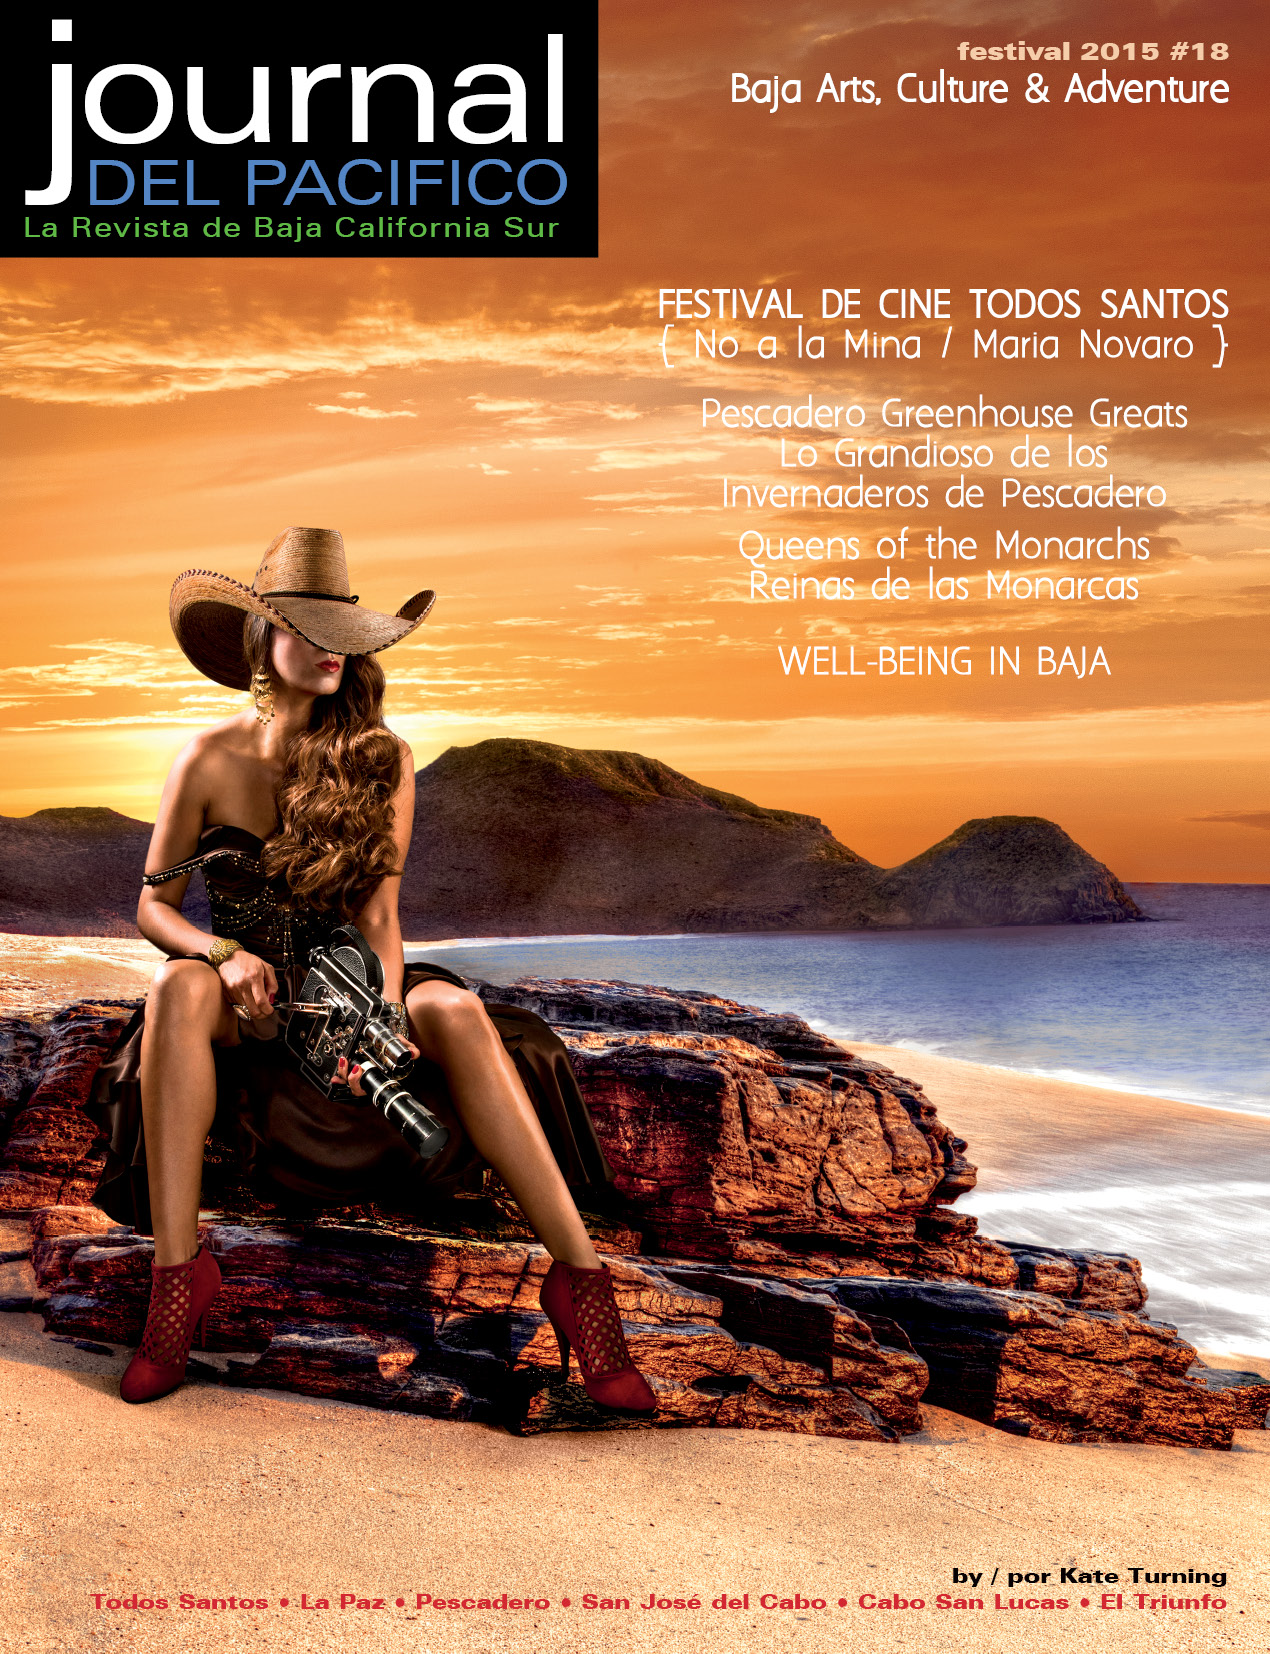 Festival 2015 Issue of Journal del Pacifico